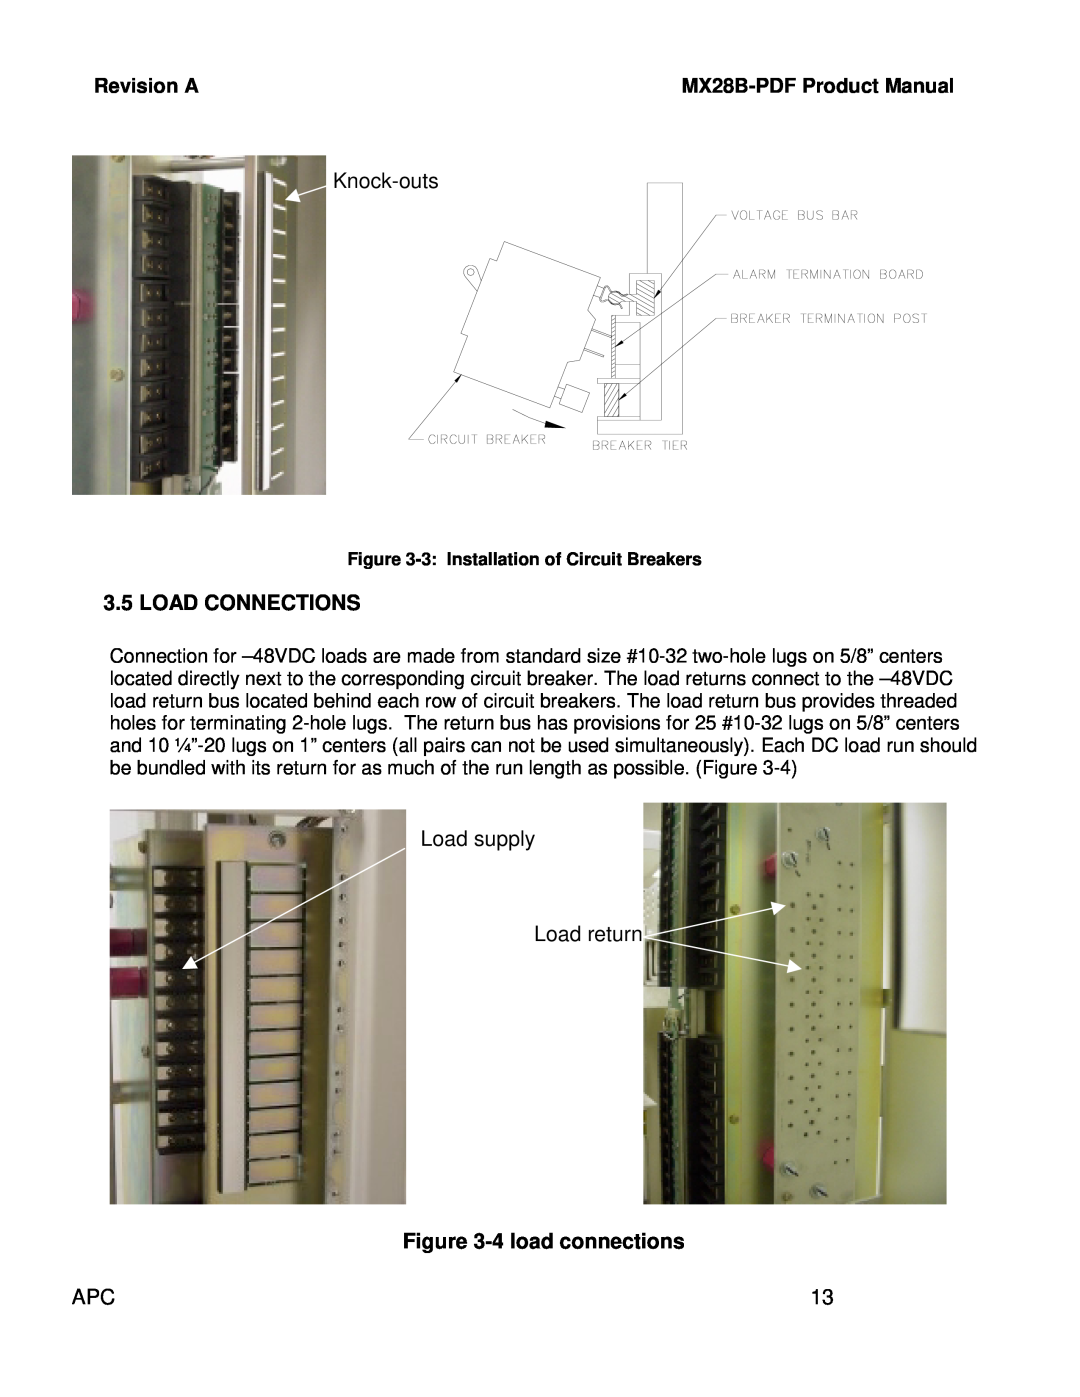 American Power Conversion MX28B-PDF manual Knock-outs, Load Connections, Load supply Load return, 4 load connections 